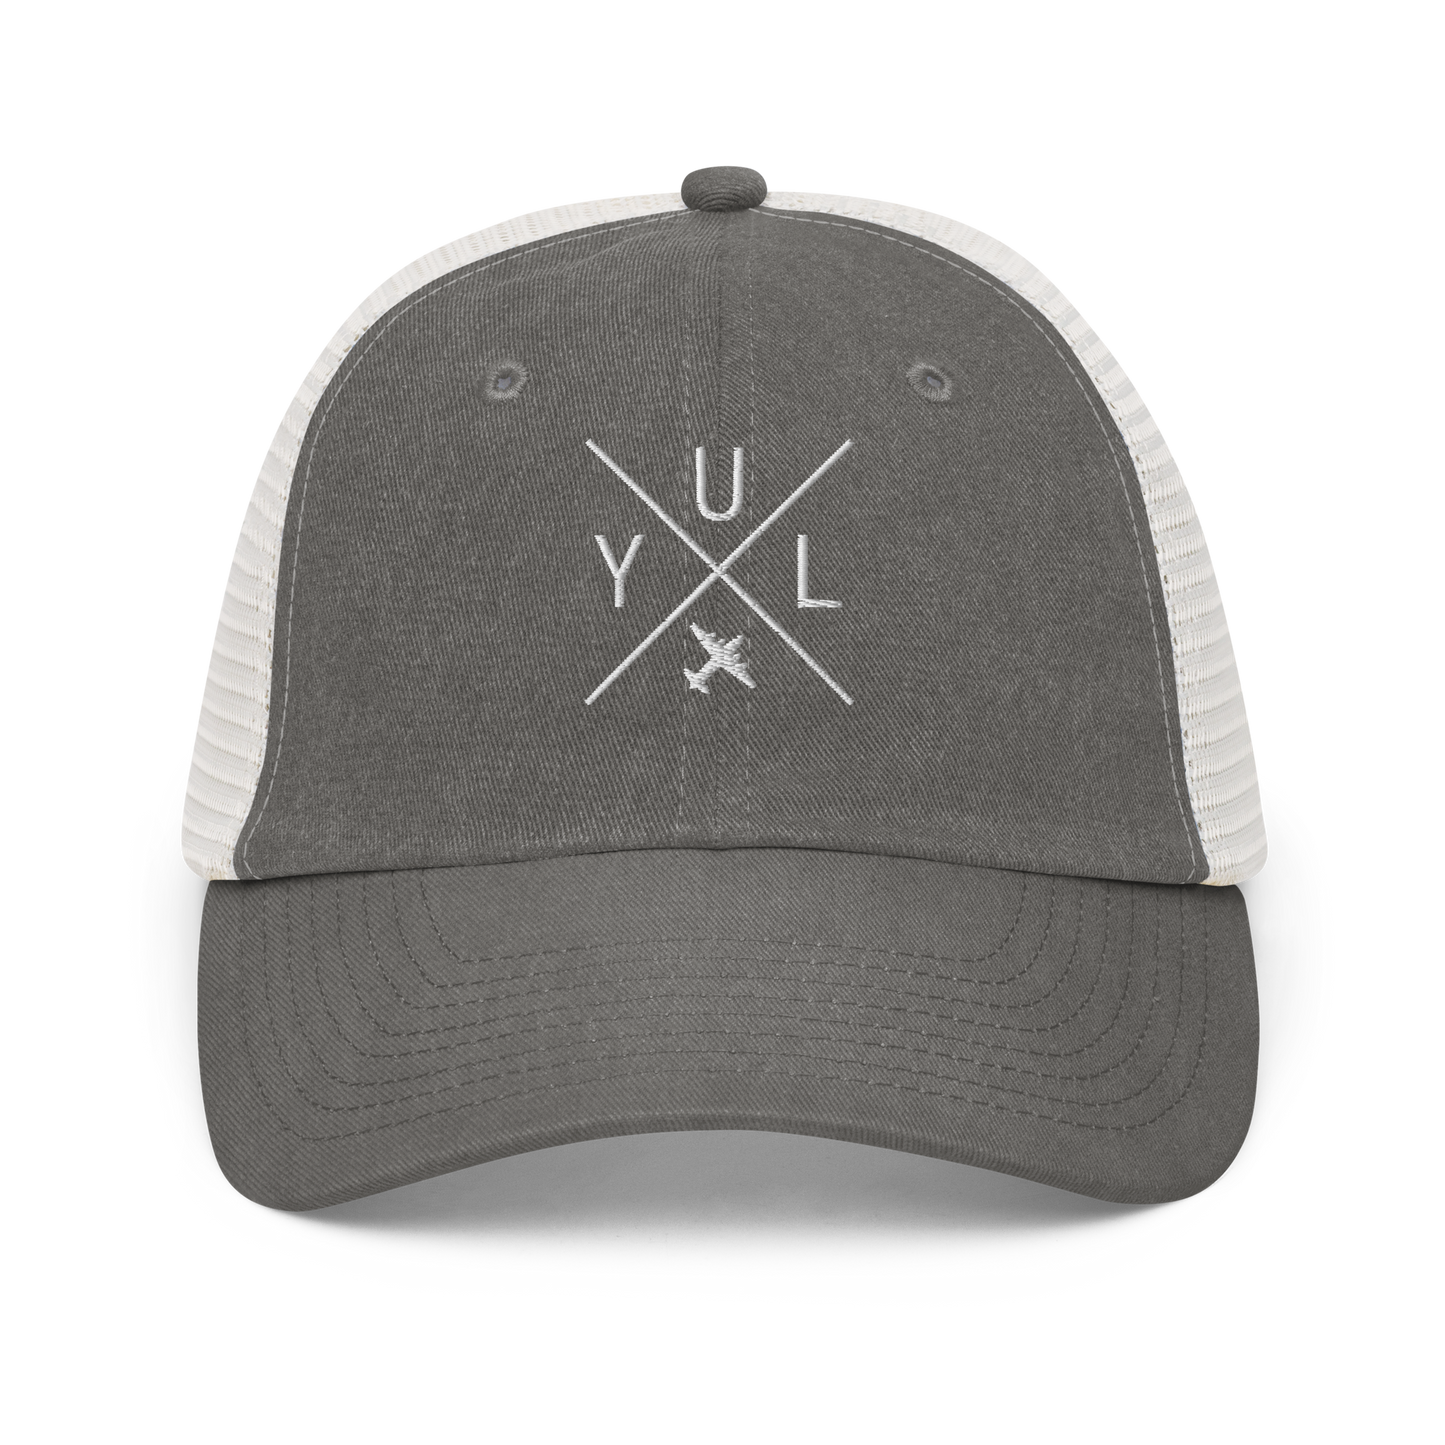 YHM Designs - YUL Montreal Pigment-Dyed Trucker Cap - Crossed-X Design with Airport Code and Vintage Propliner - White Embroidery - Image 09